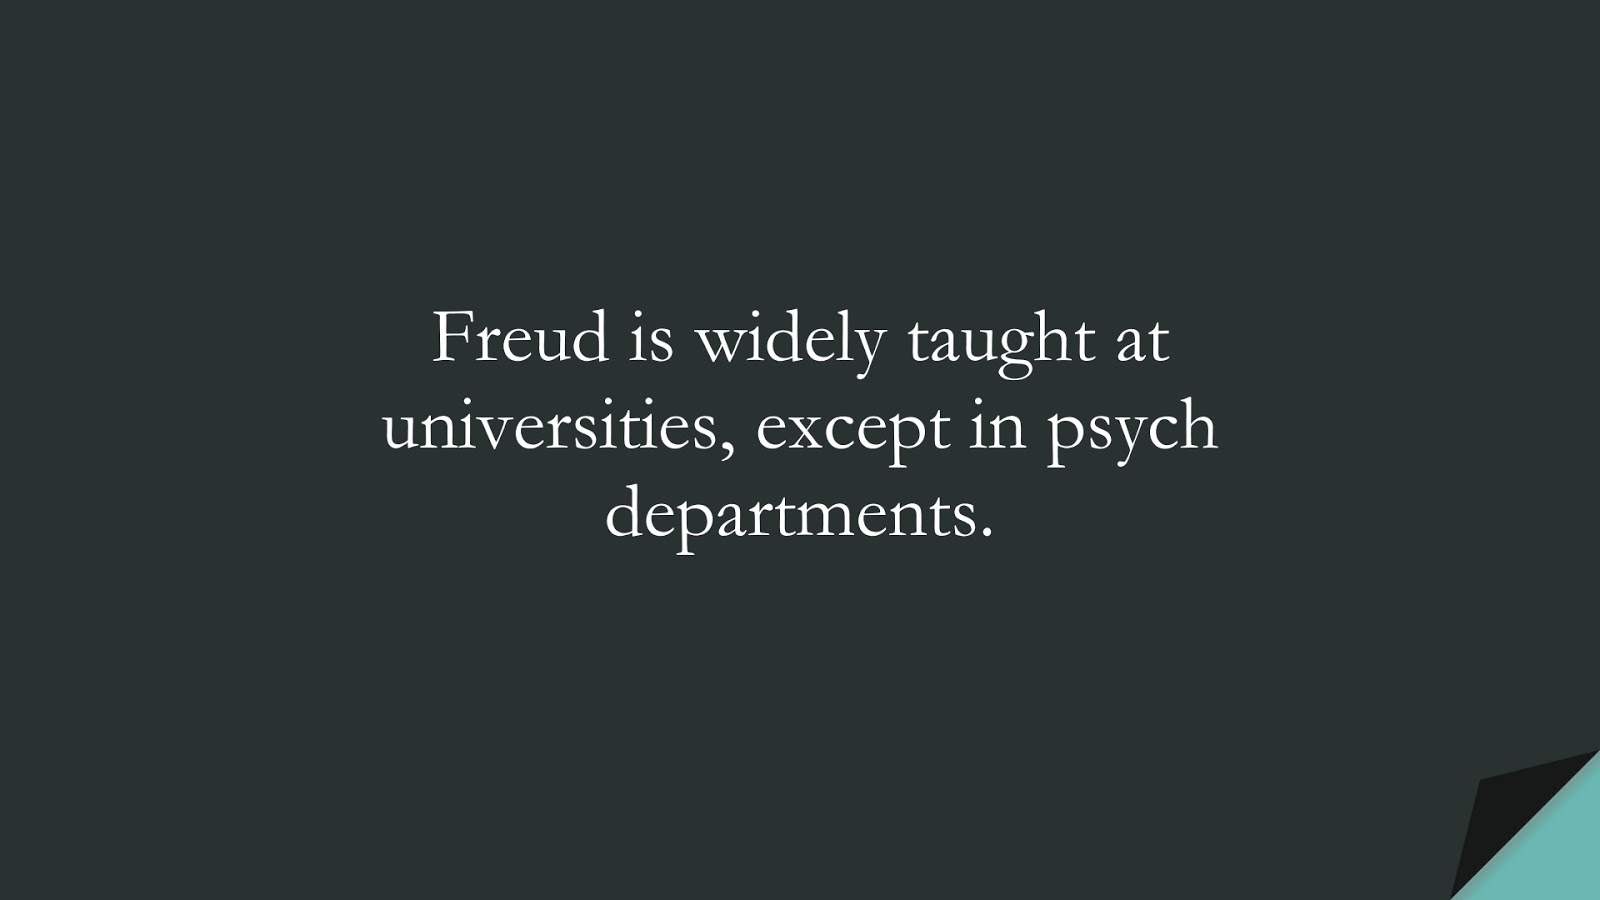 Freud is widely taught at universities, except in psych departments.FALSE